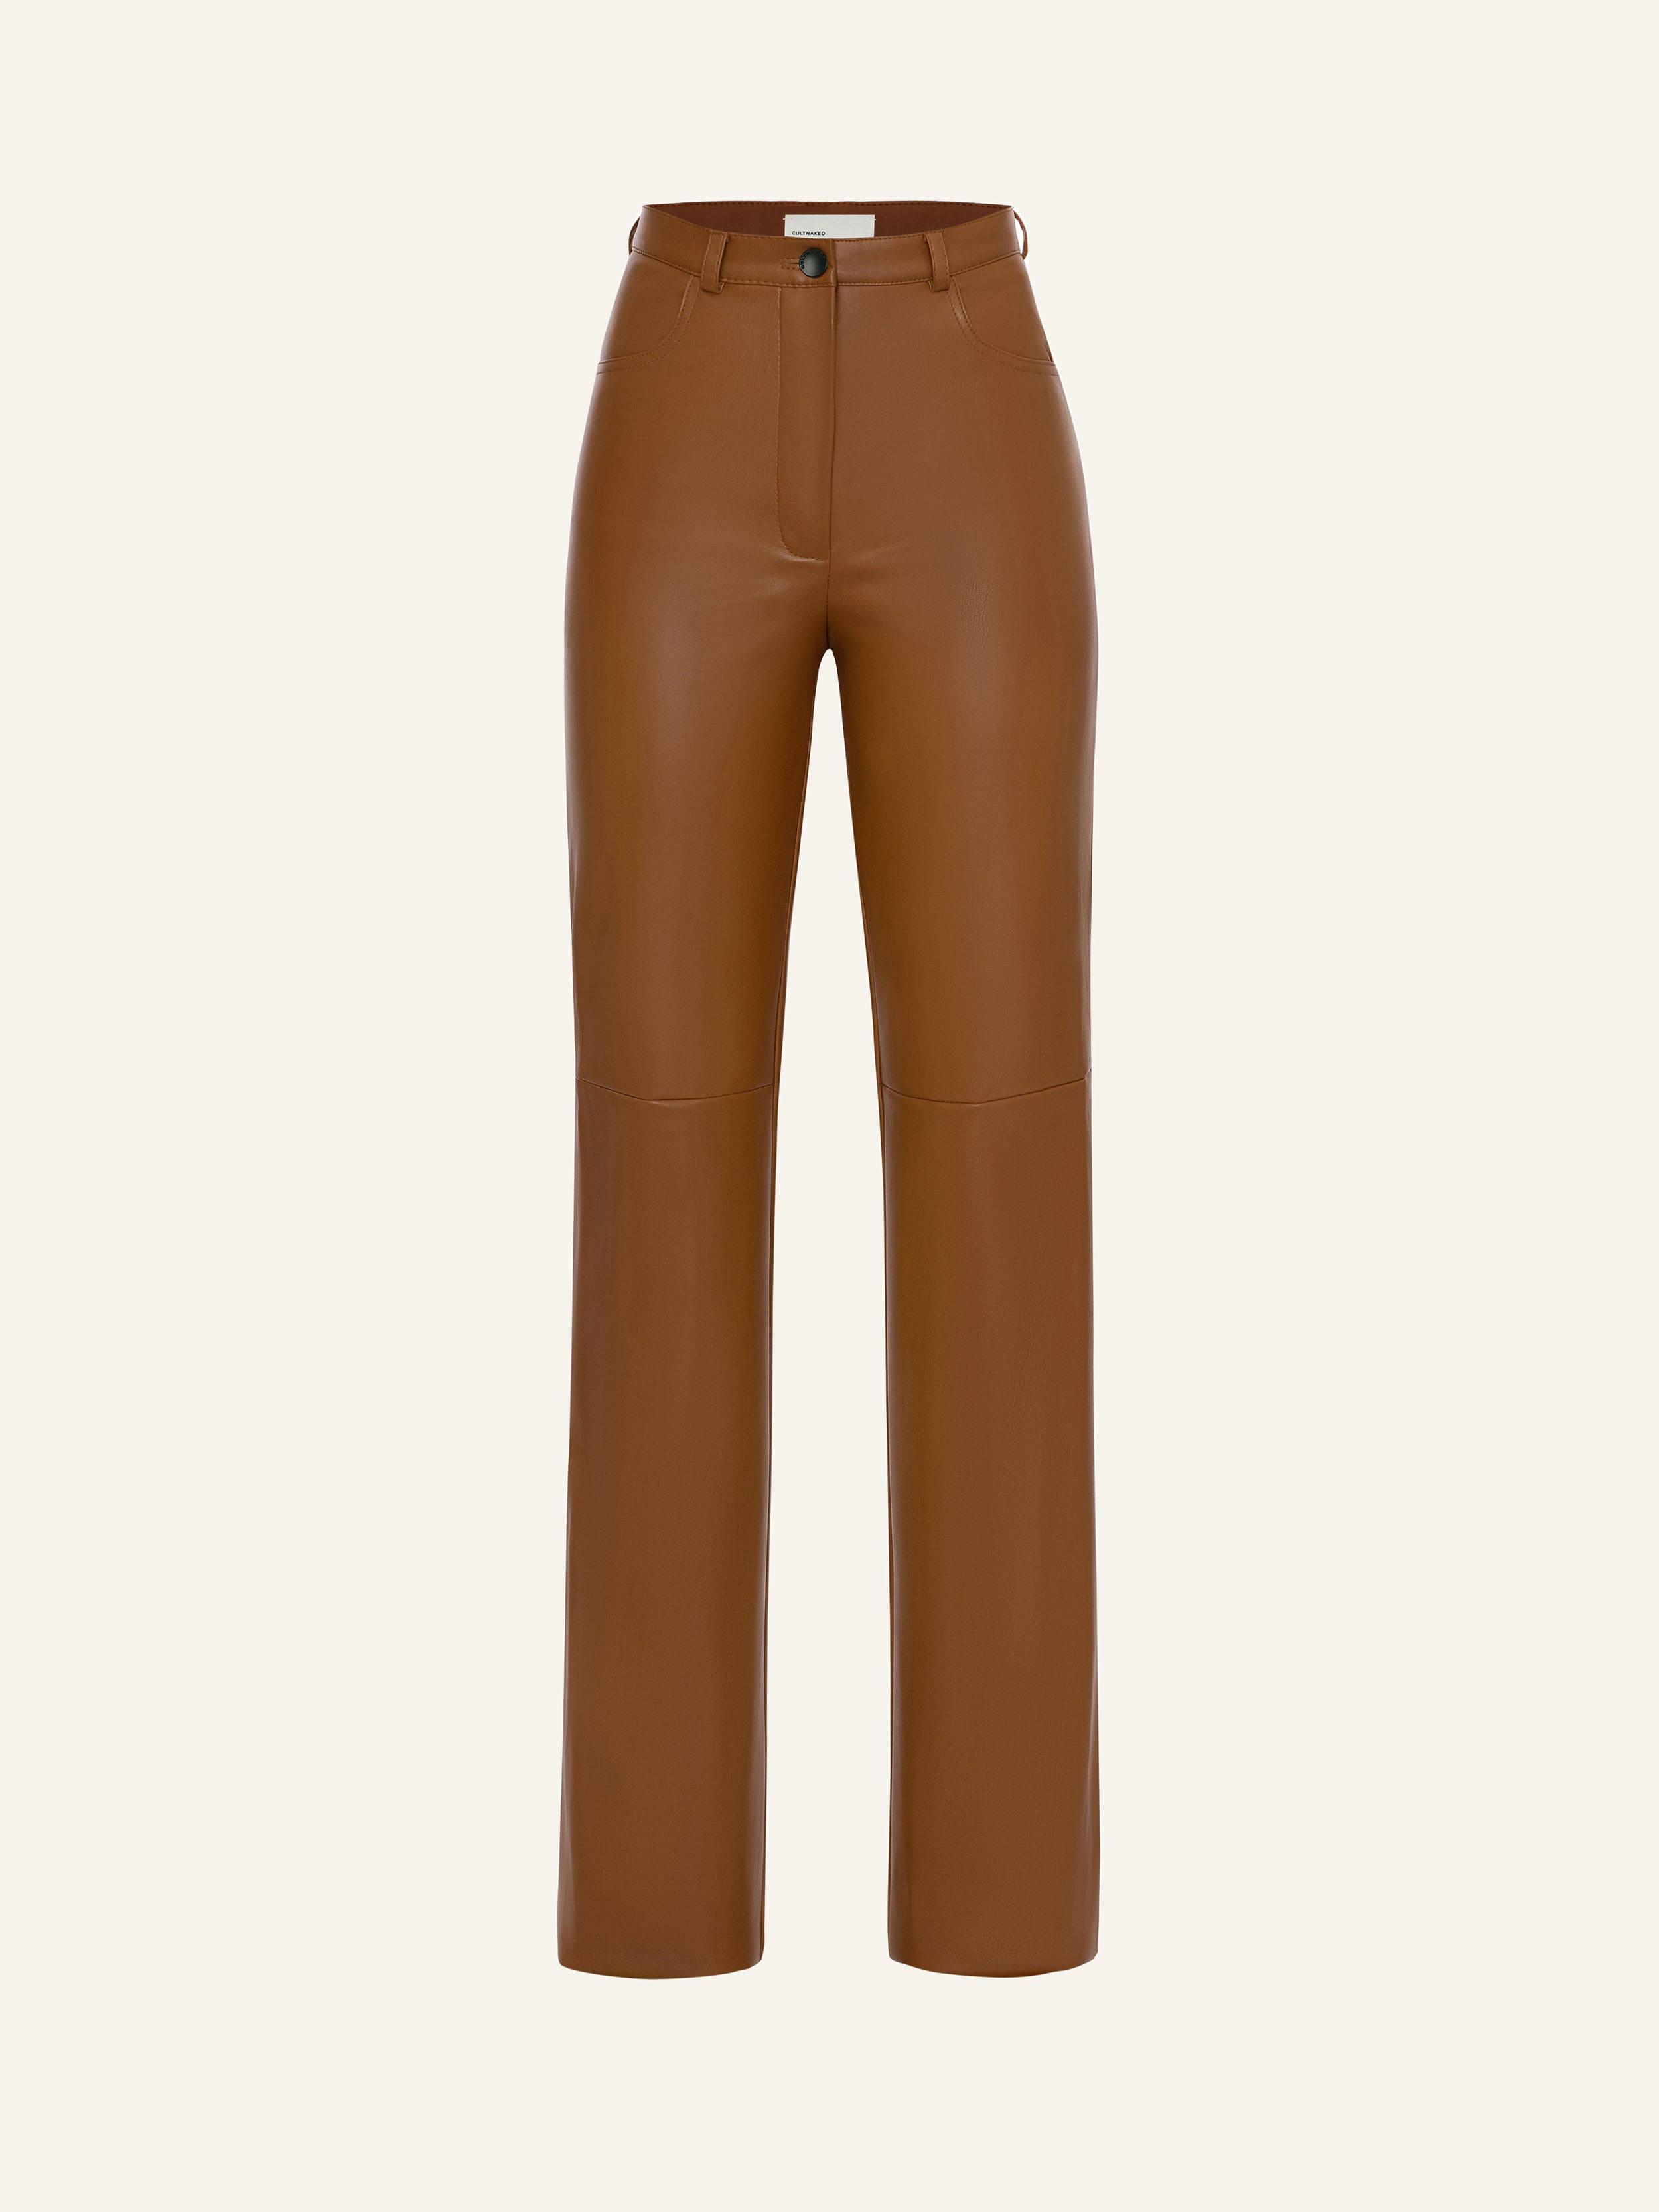 Product photo of brown vegan leather high rise straight leg pants